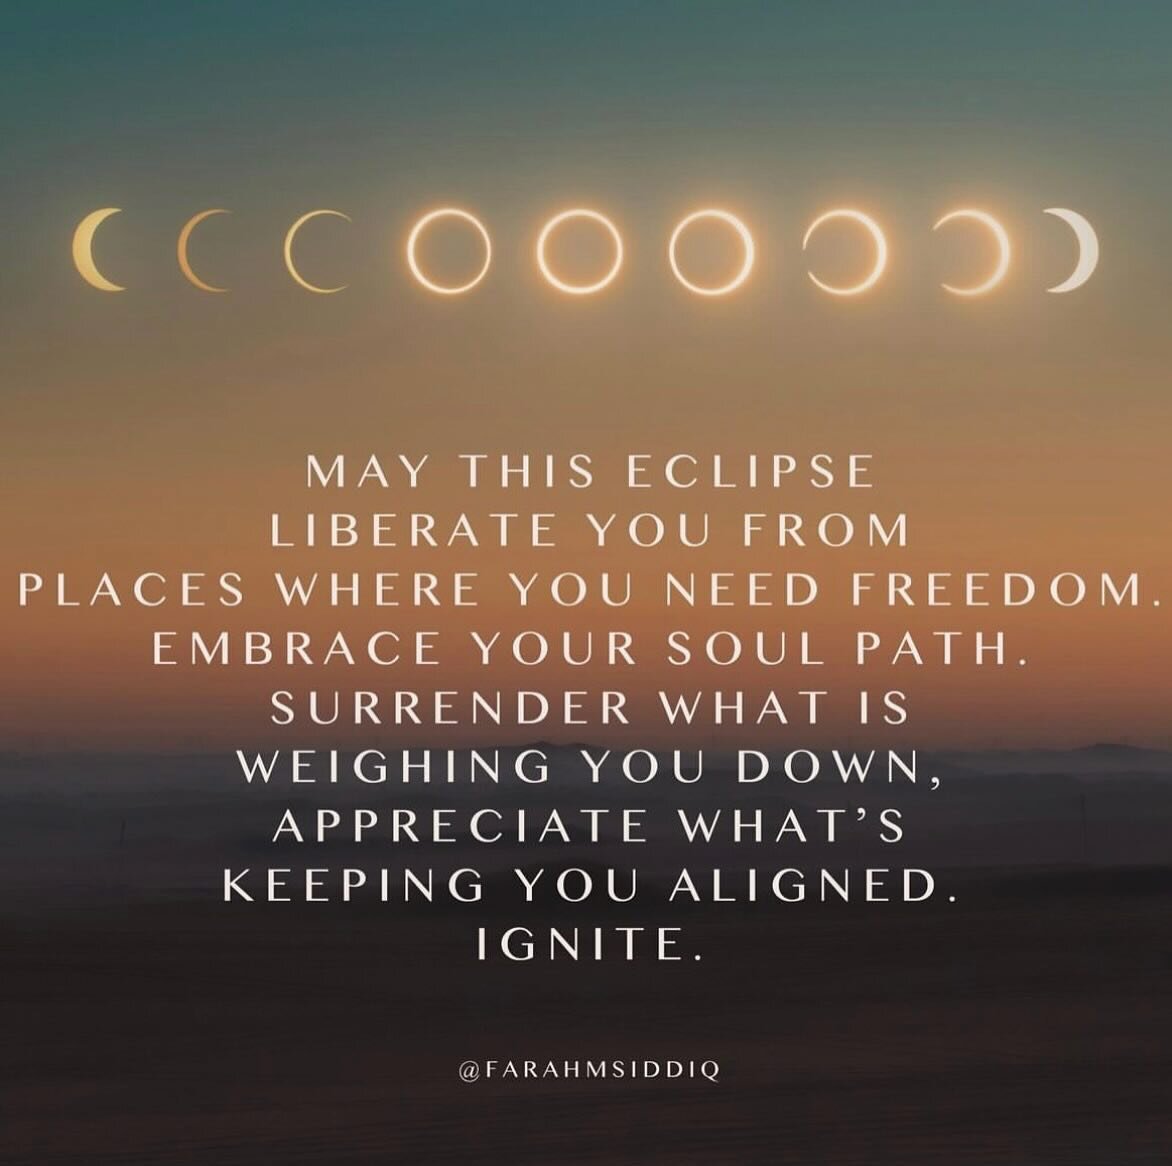 It&rsquo;s a beautiful day here today in Northwest Indiana. Make it intentional. I hope you get to create a little space for self-care, reflection and ritual. ☀️🌑

#eclipse #selfcare #ritual #reflection